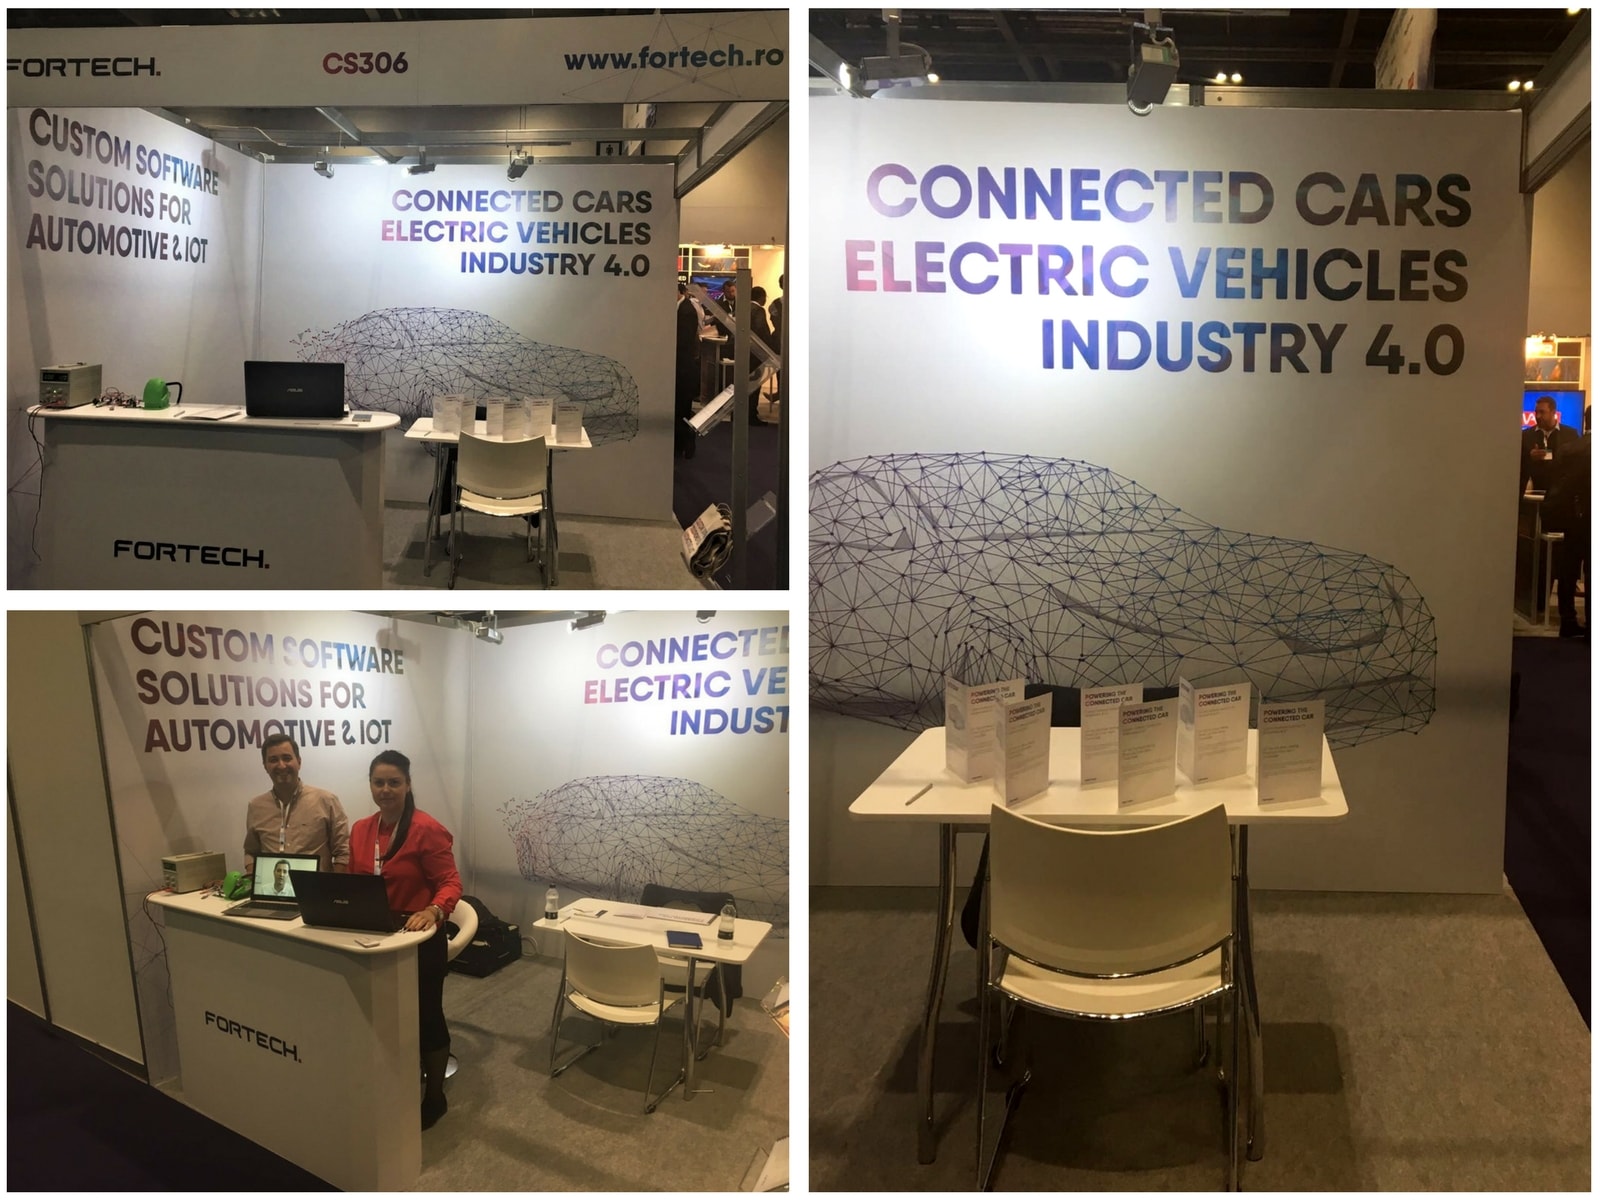 Fortech at Connected Cars London